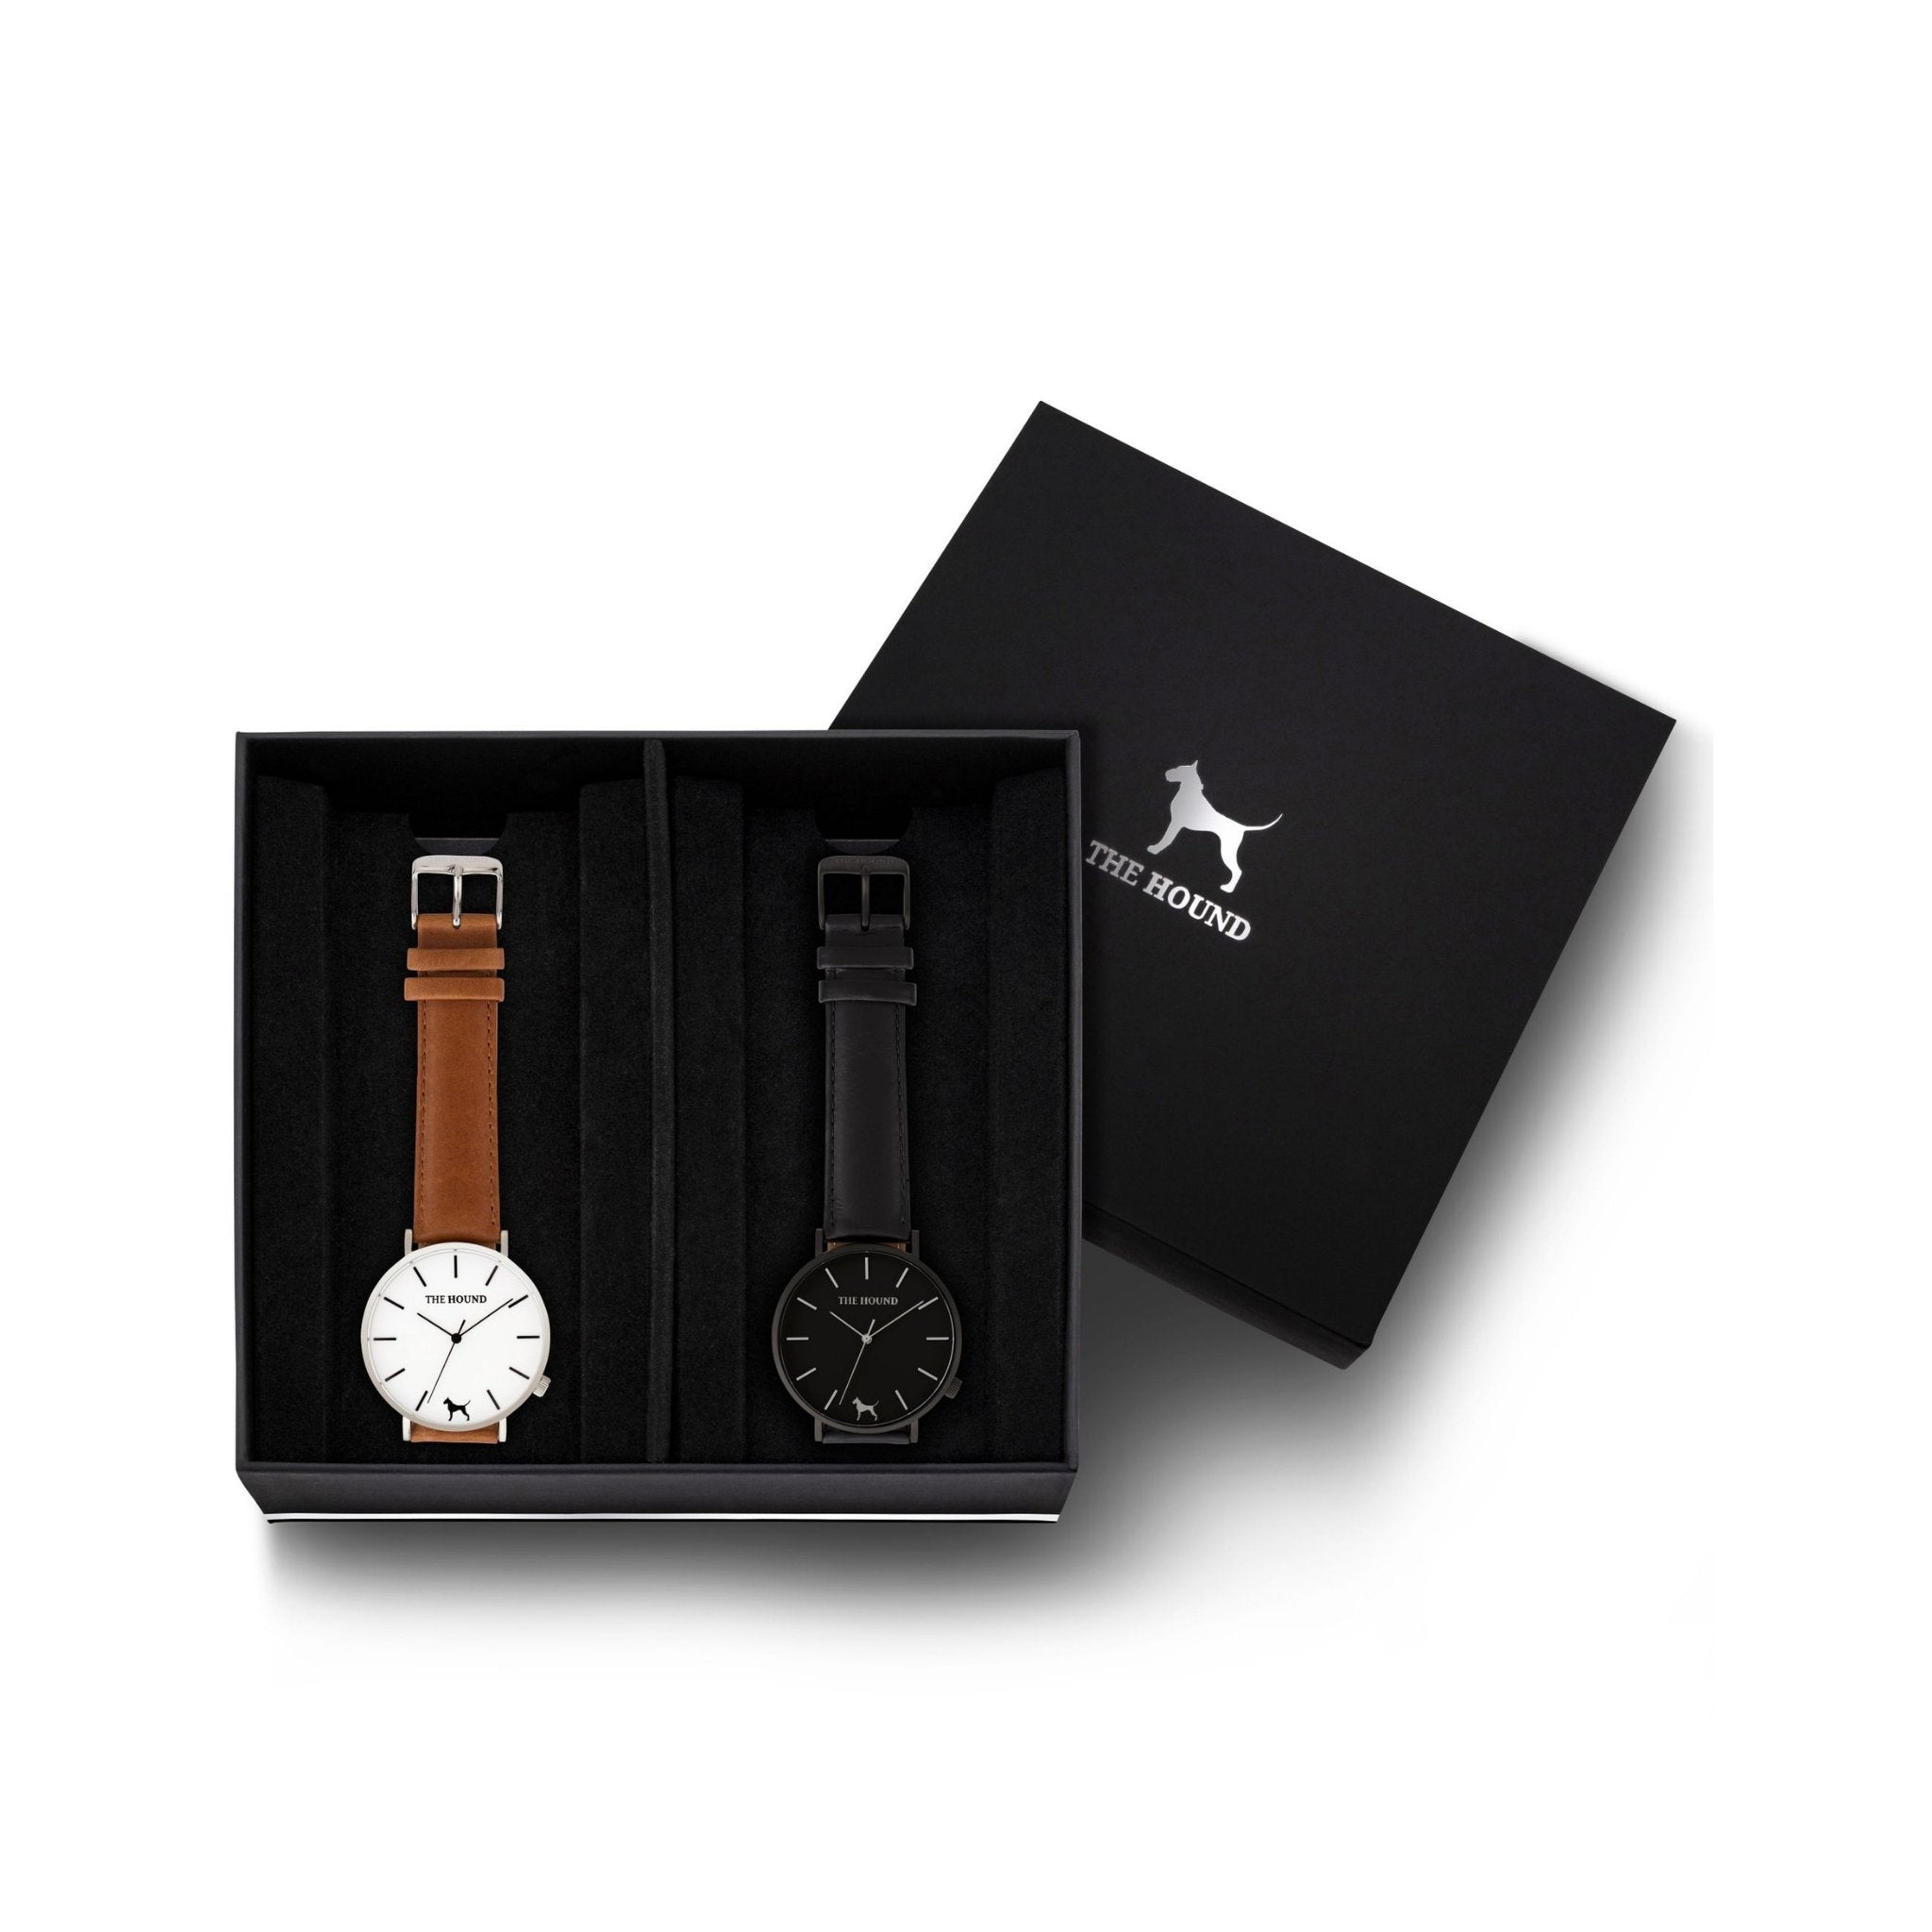 Custom gift set - Silver and white watch with stitched tan genuine leather band and a matte black and black watch with stitched black genuine leather band